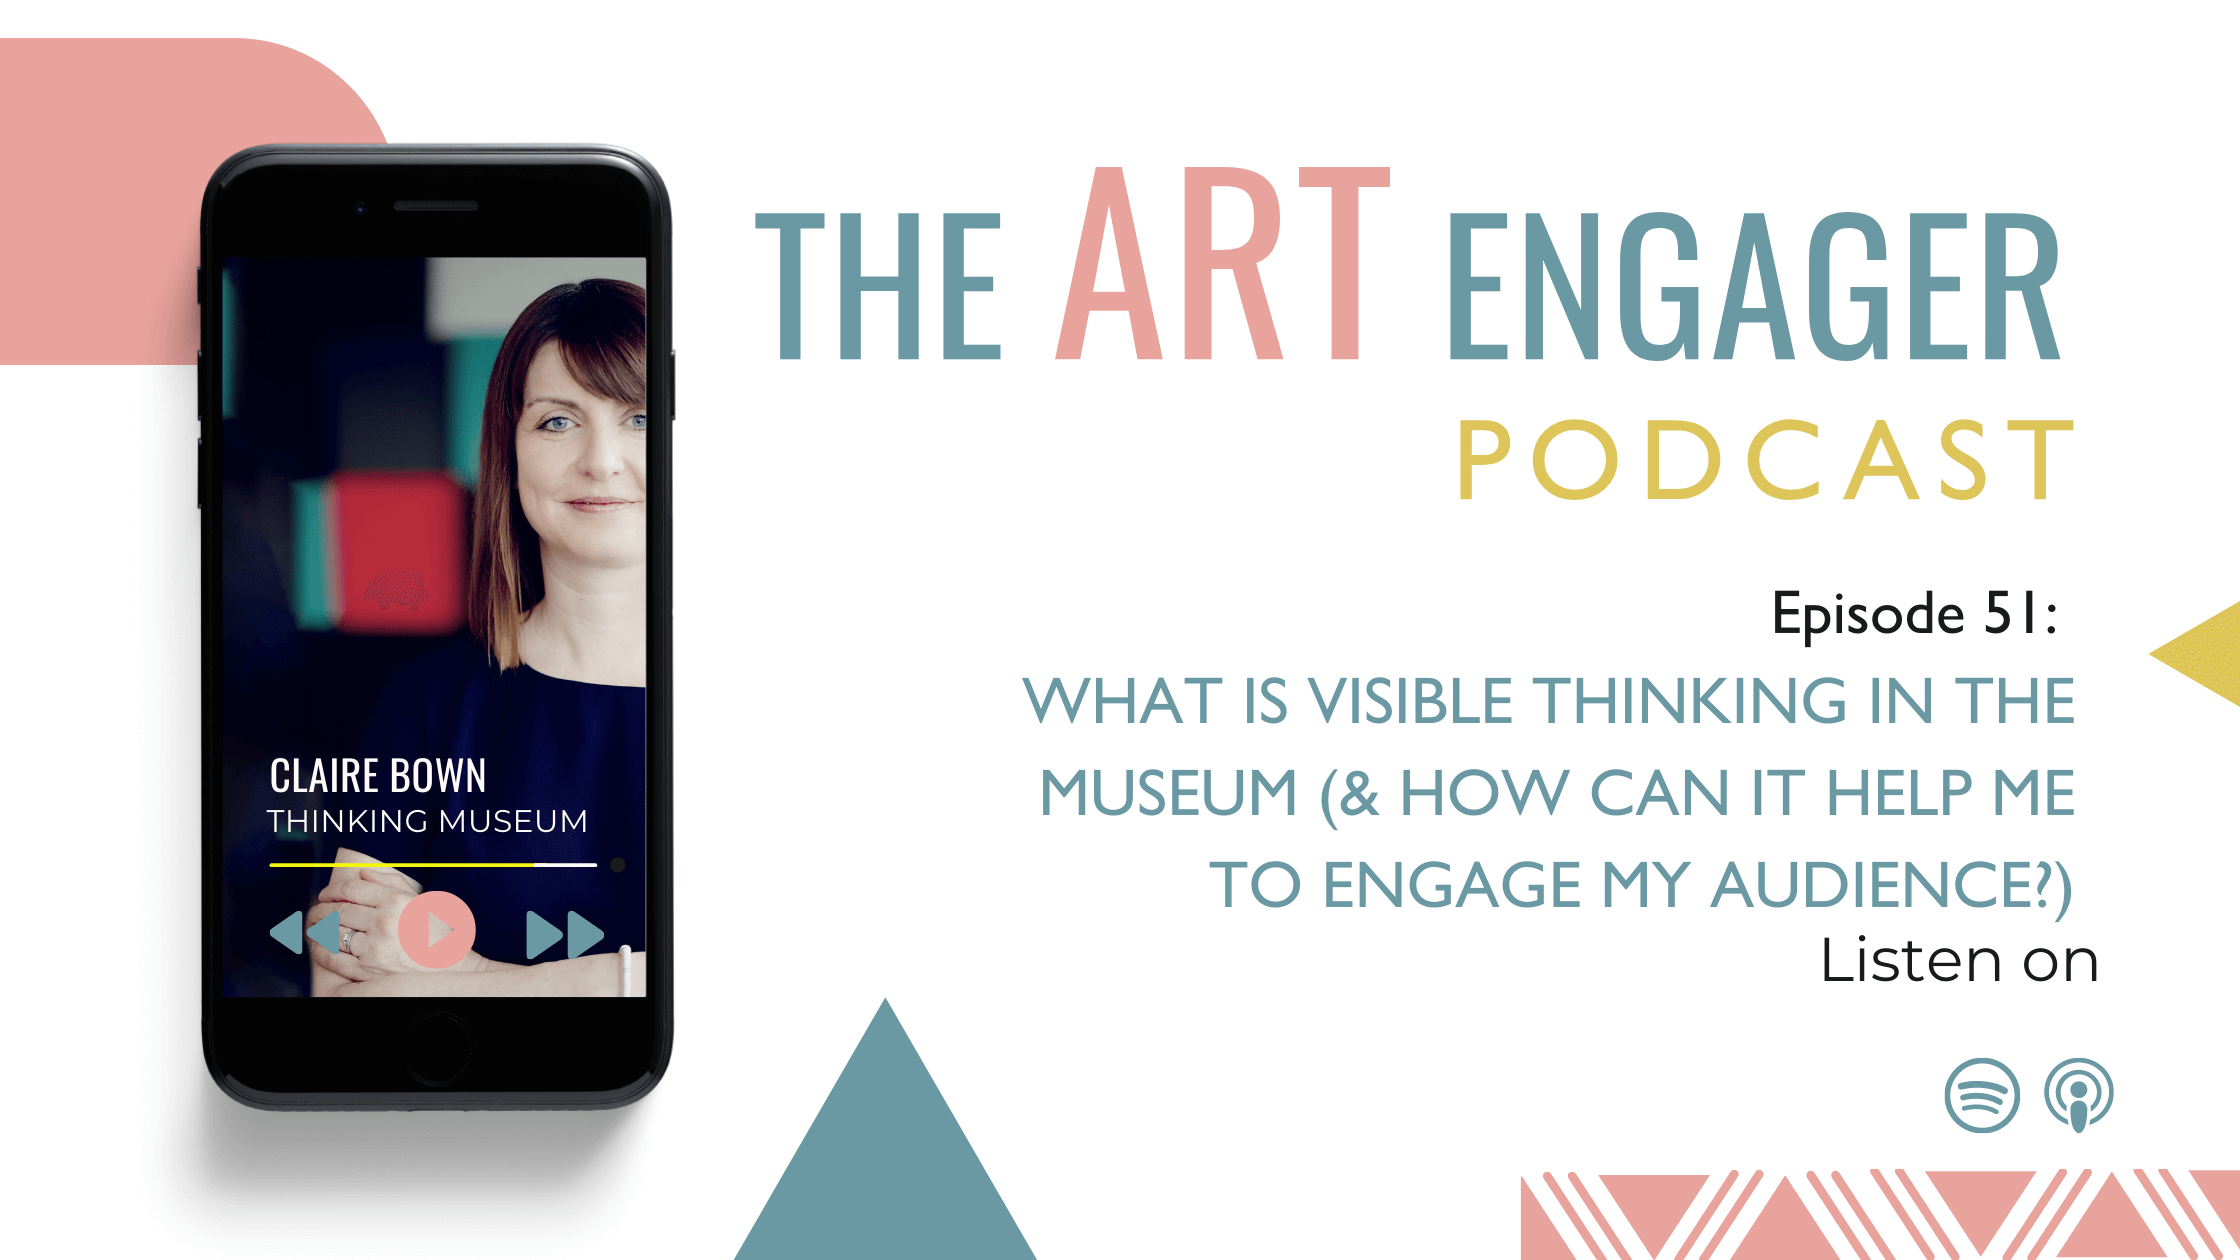 WHAT IS VISIBLE THINKING IN THE MUSEUM AND HOW CAN IT HELP ME TO ENGAGE MY AUDIENCE?